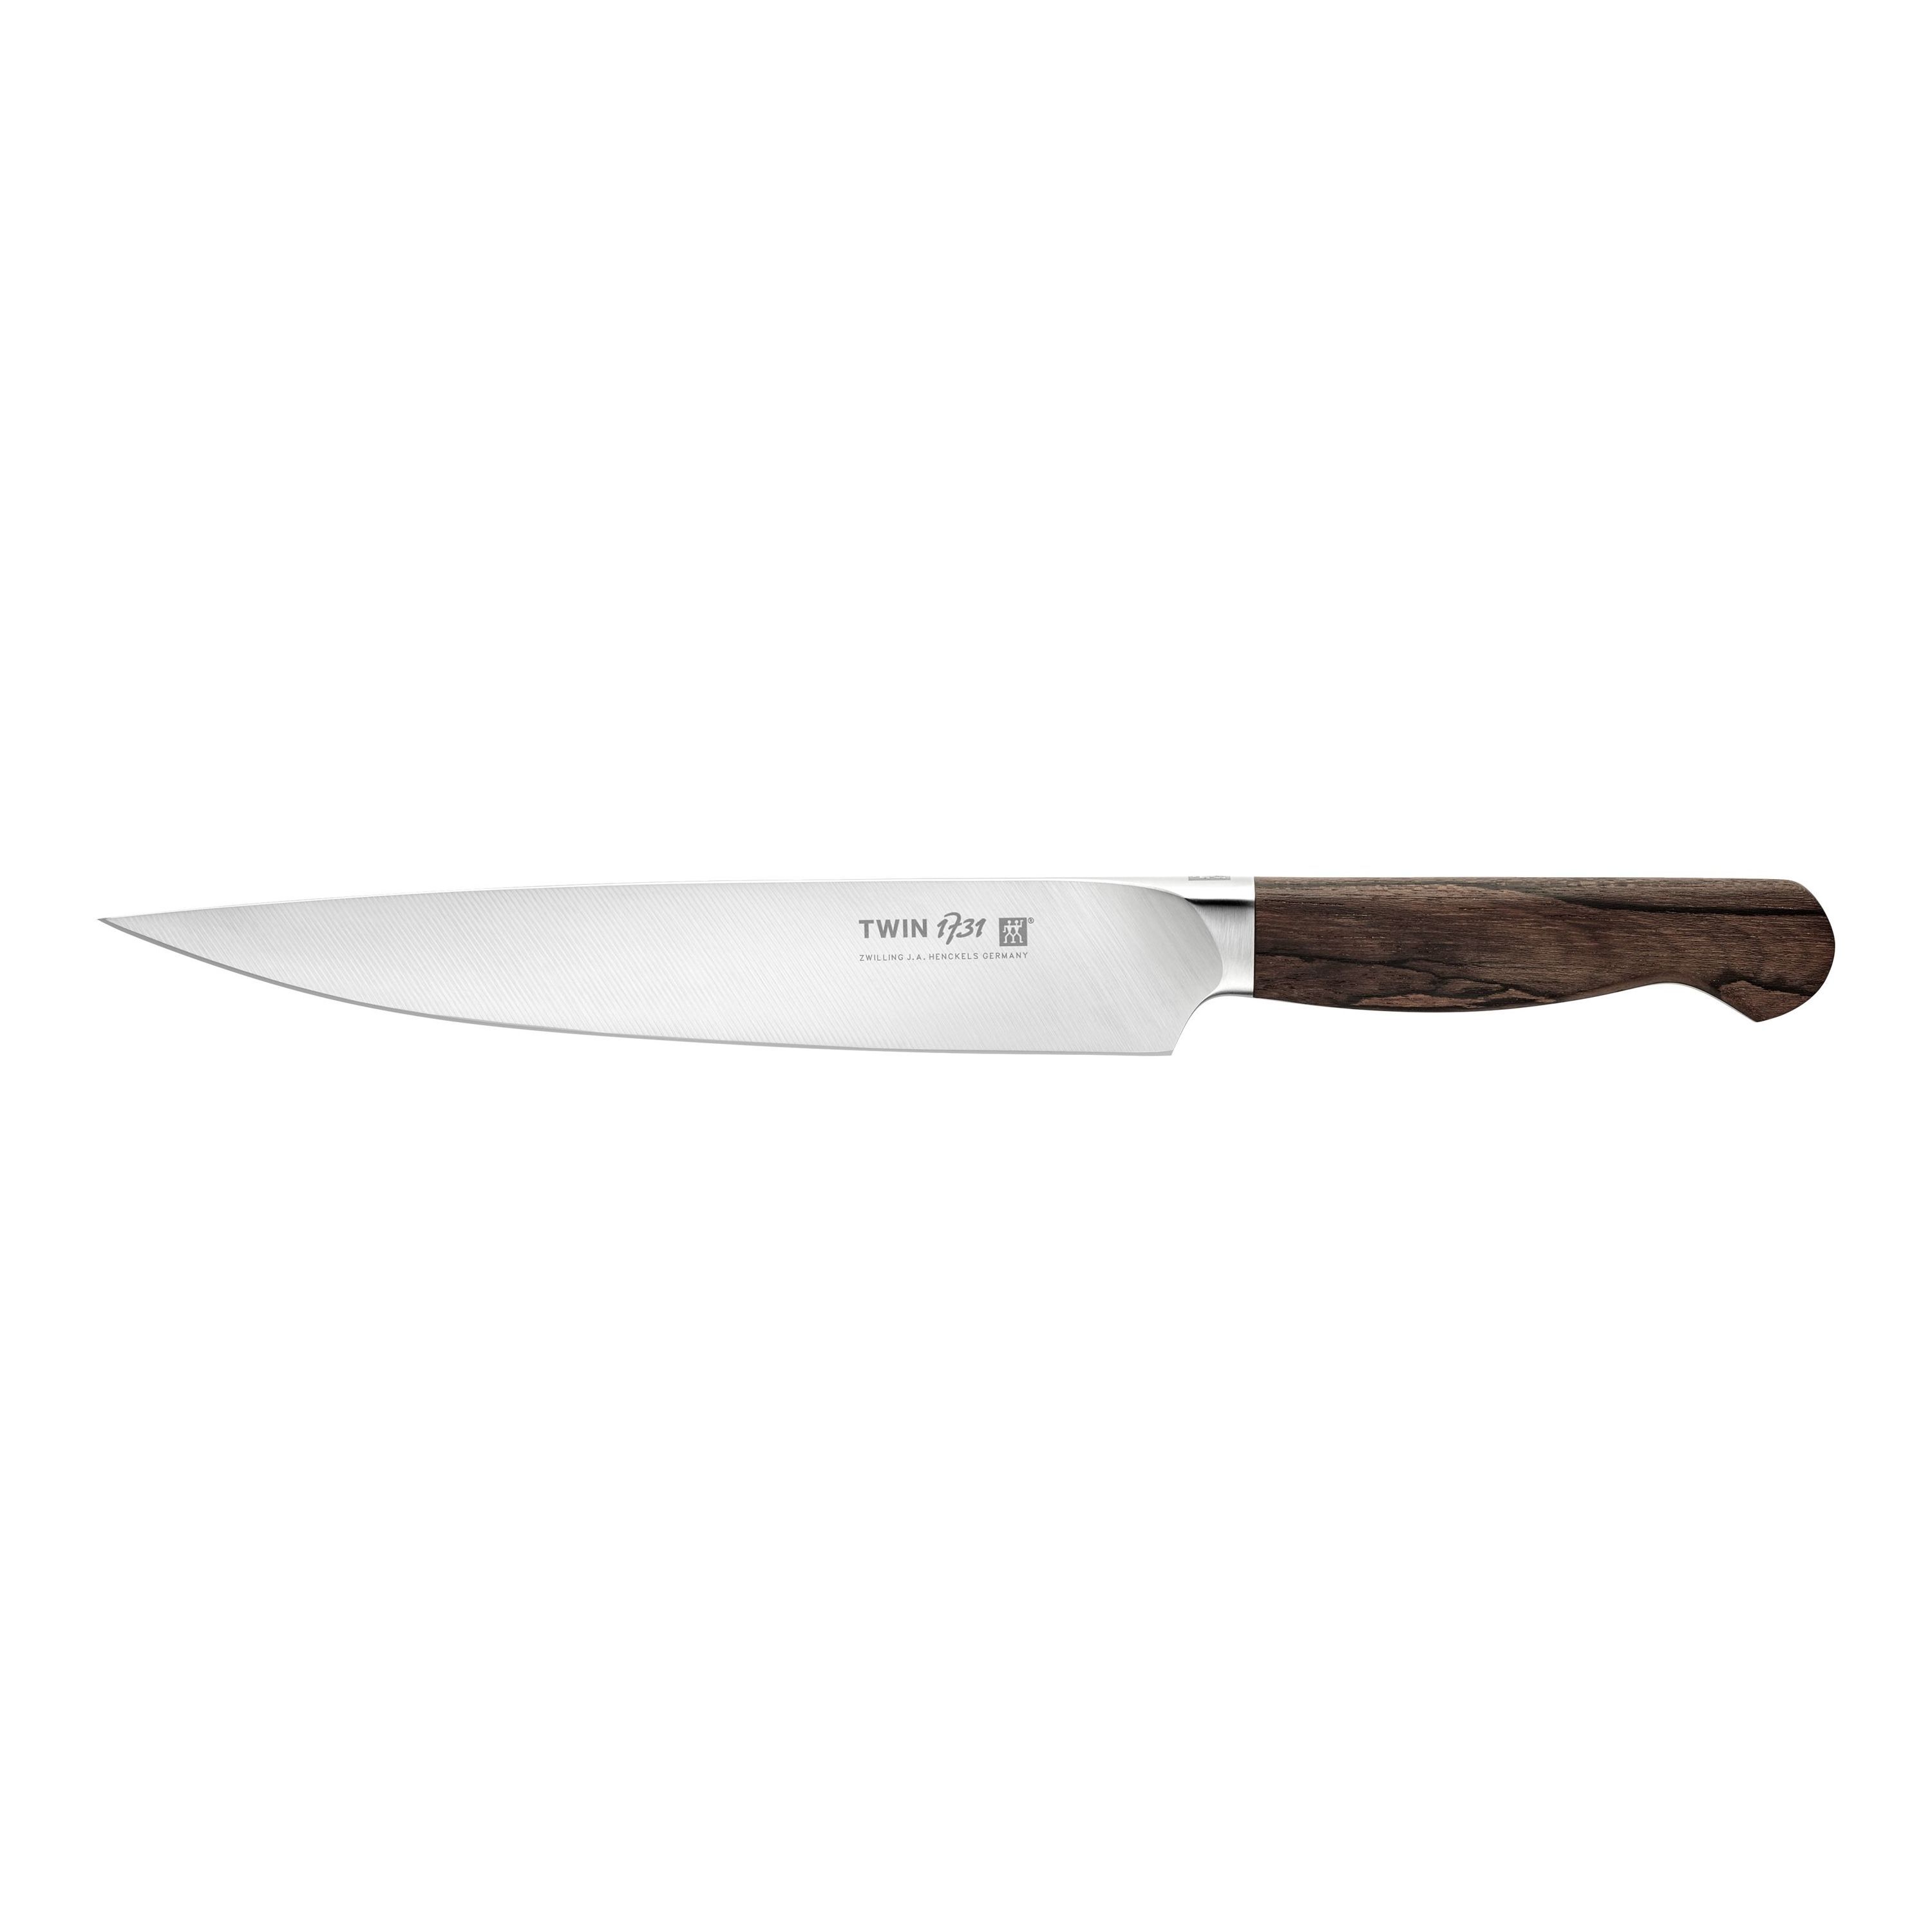 ZWILLING TWIN 1731 Knives